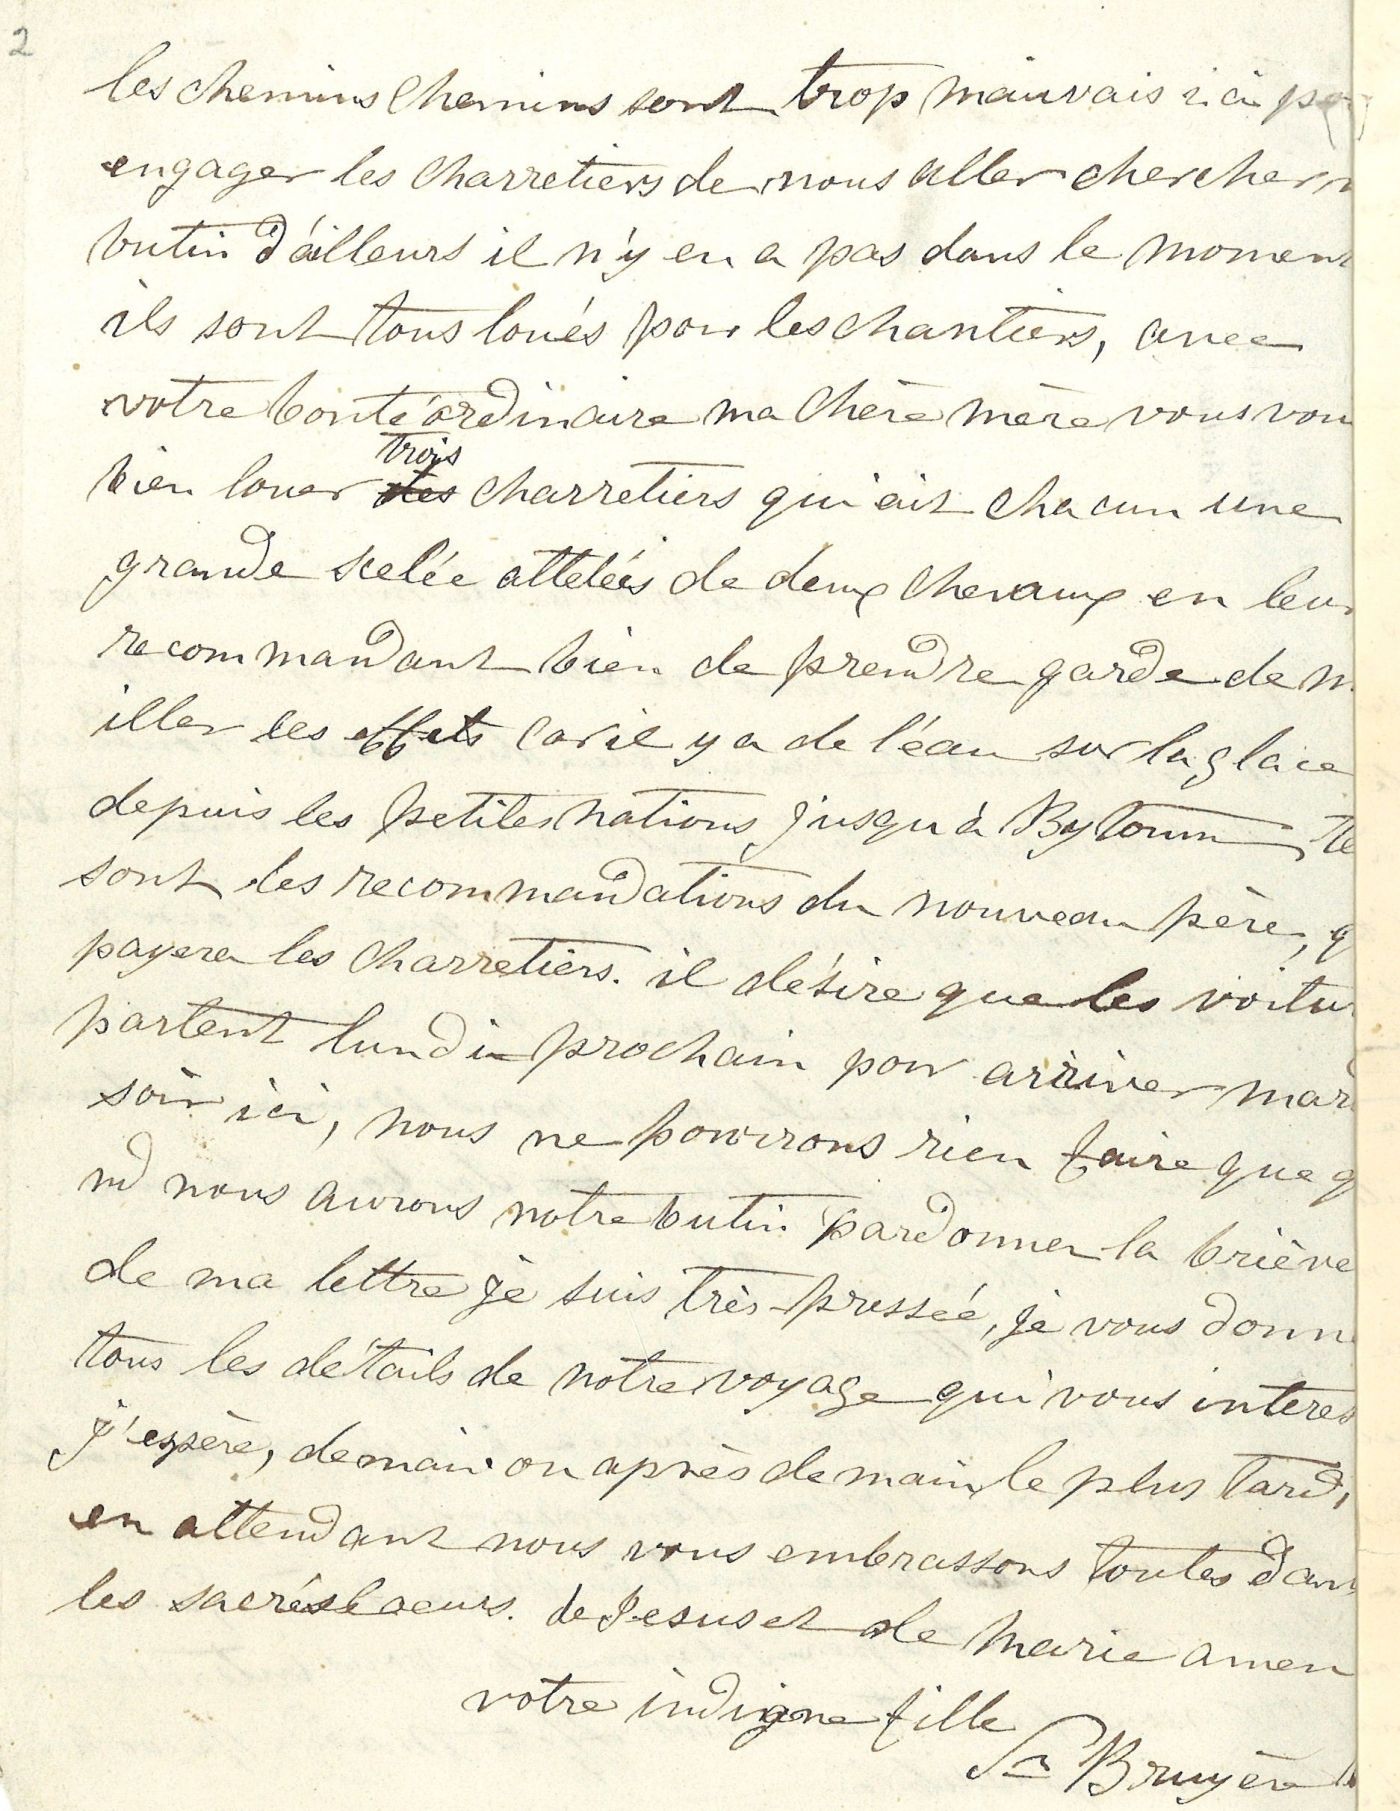 Letters handwritten in French. The document is numbered, and the stamp of the Archives of the Grey Nuns of Montreal appears on pages 1 and 3. The first letter is signed by Sister Bruyère; the second letter is not signed. Page 6 includes the envelope of the letter with the postmark and date of receipt.